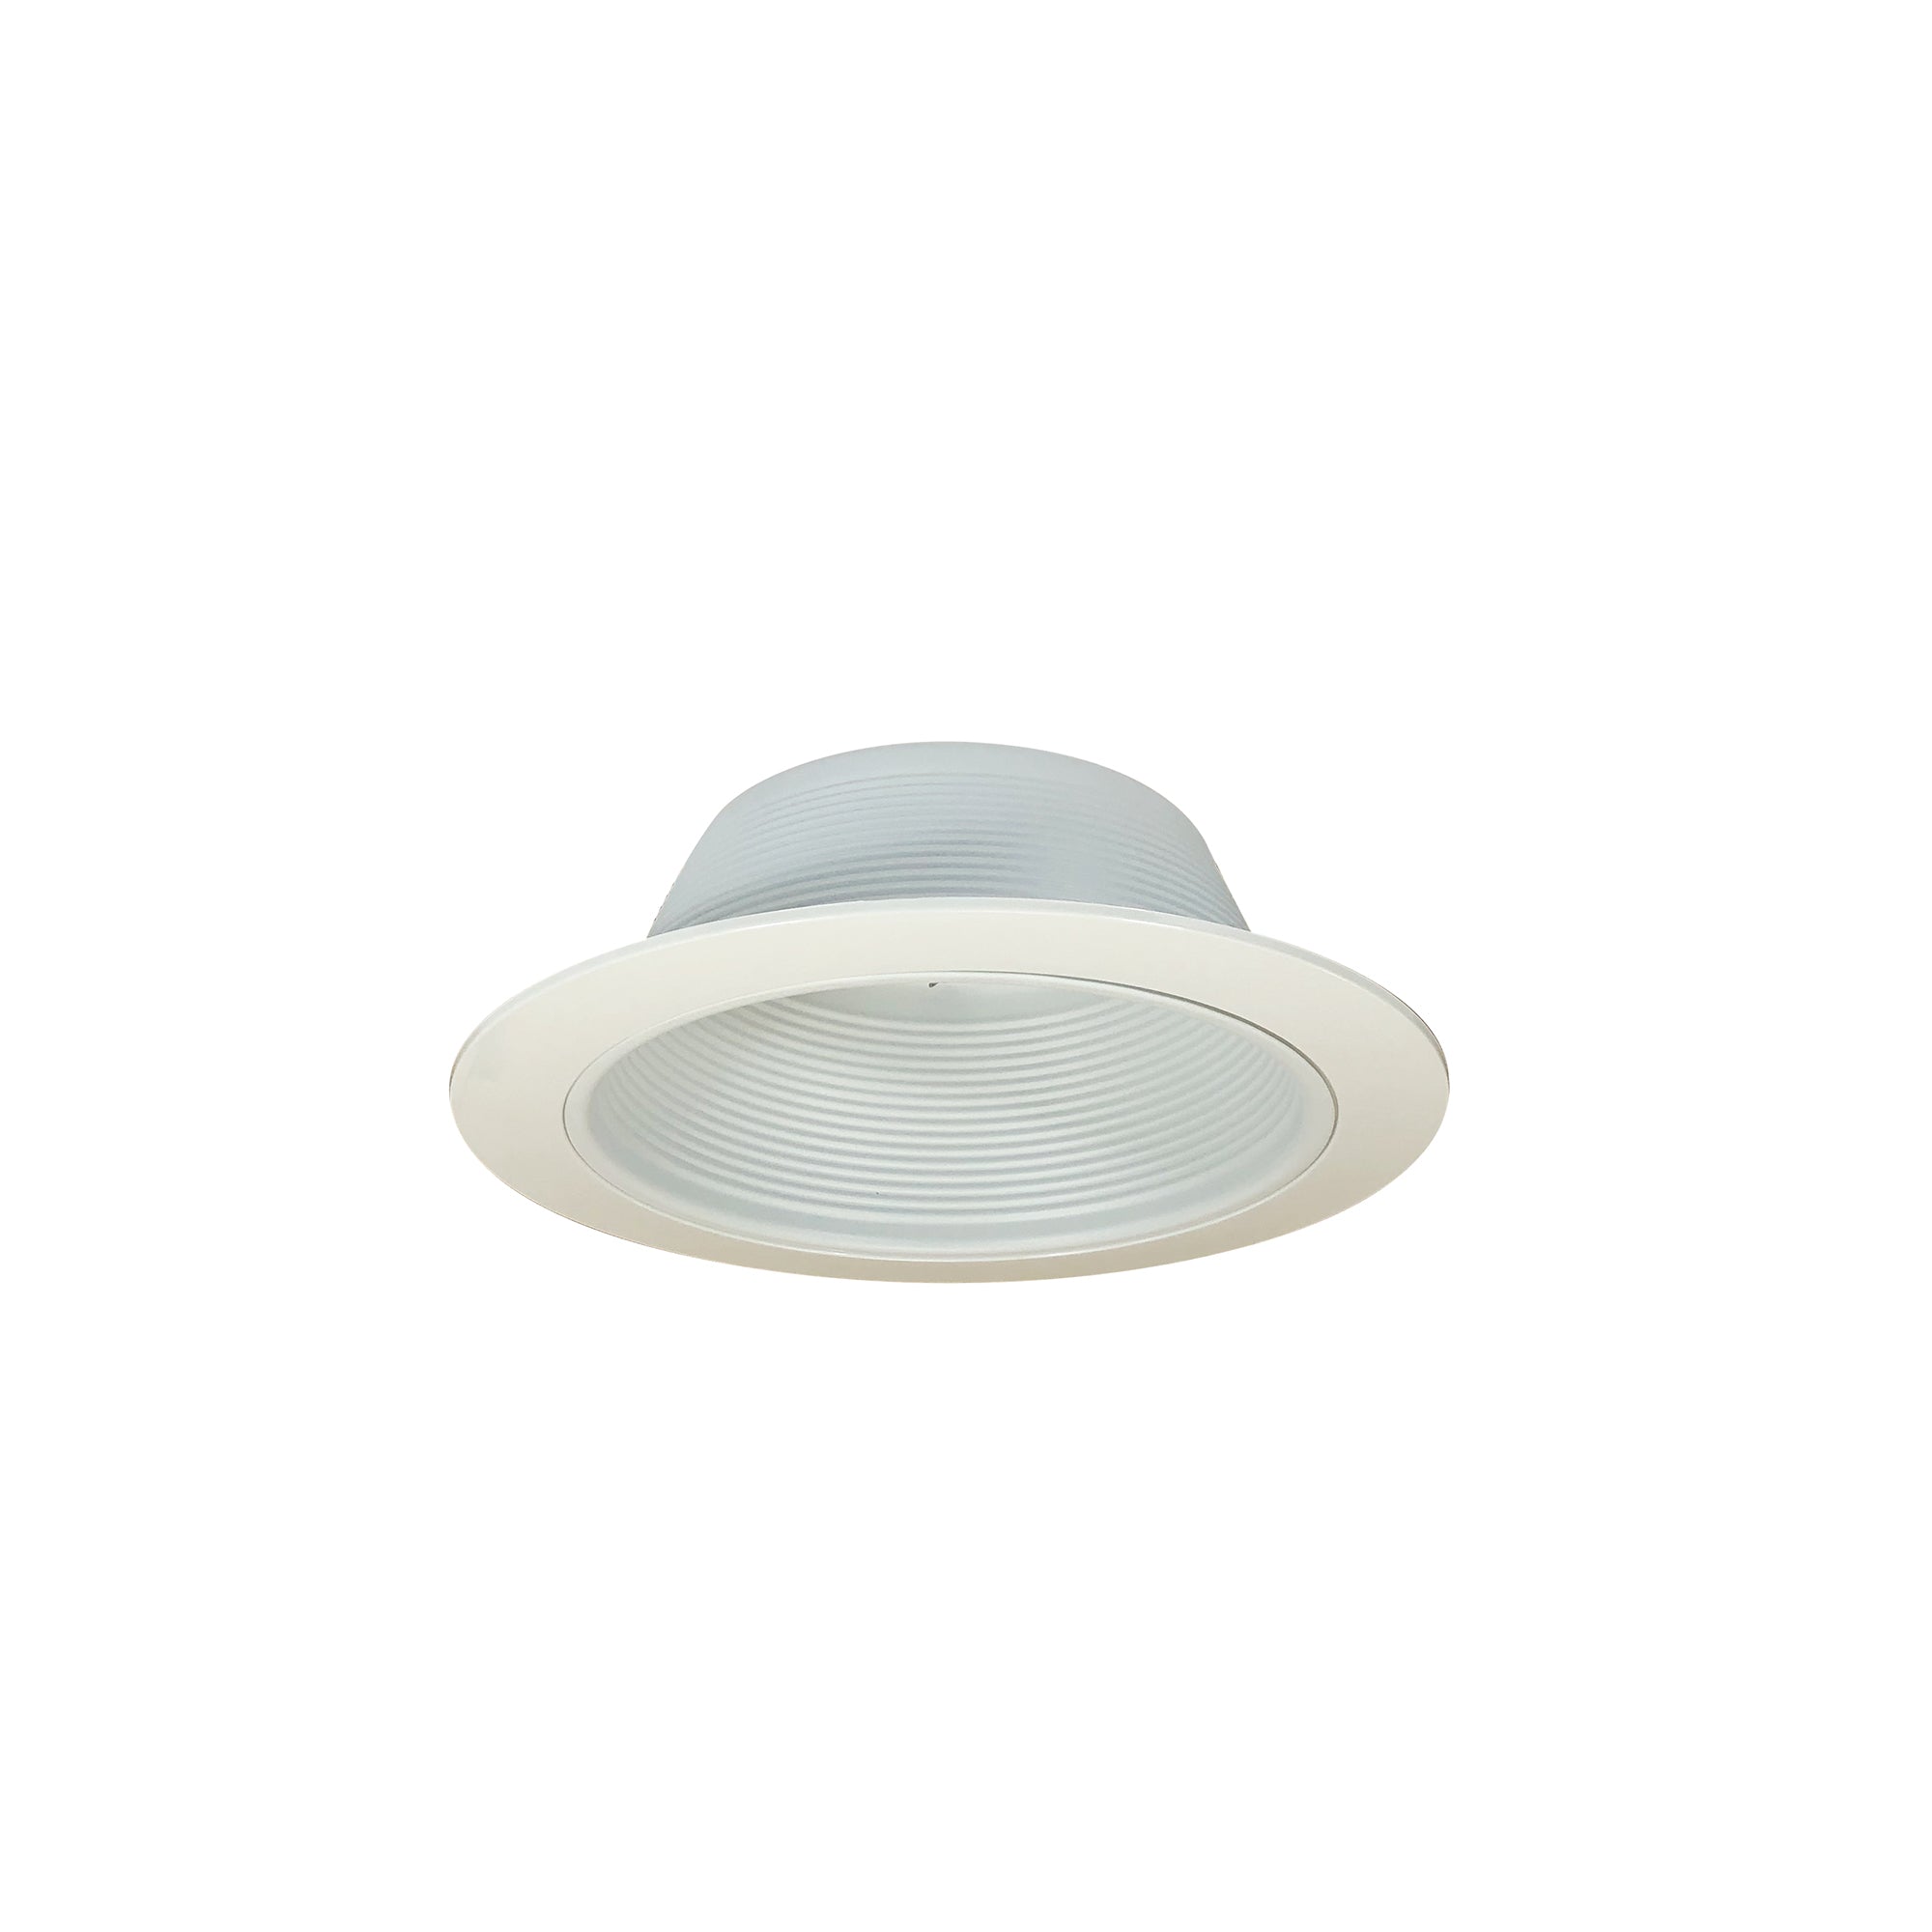 Nora Lighting NTM-31OV - Recessed - 6 Inch BR/PAR30 Stepped Baffle w/ Plastic Oversized Ring, White